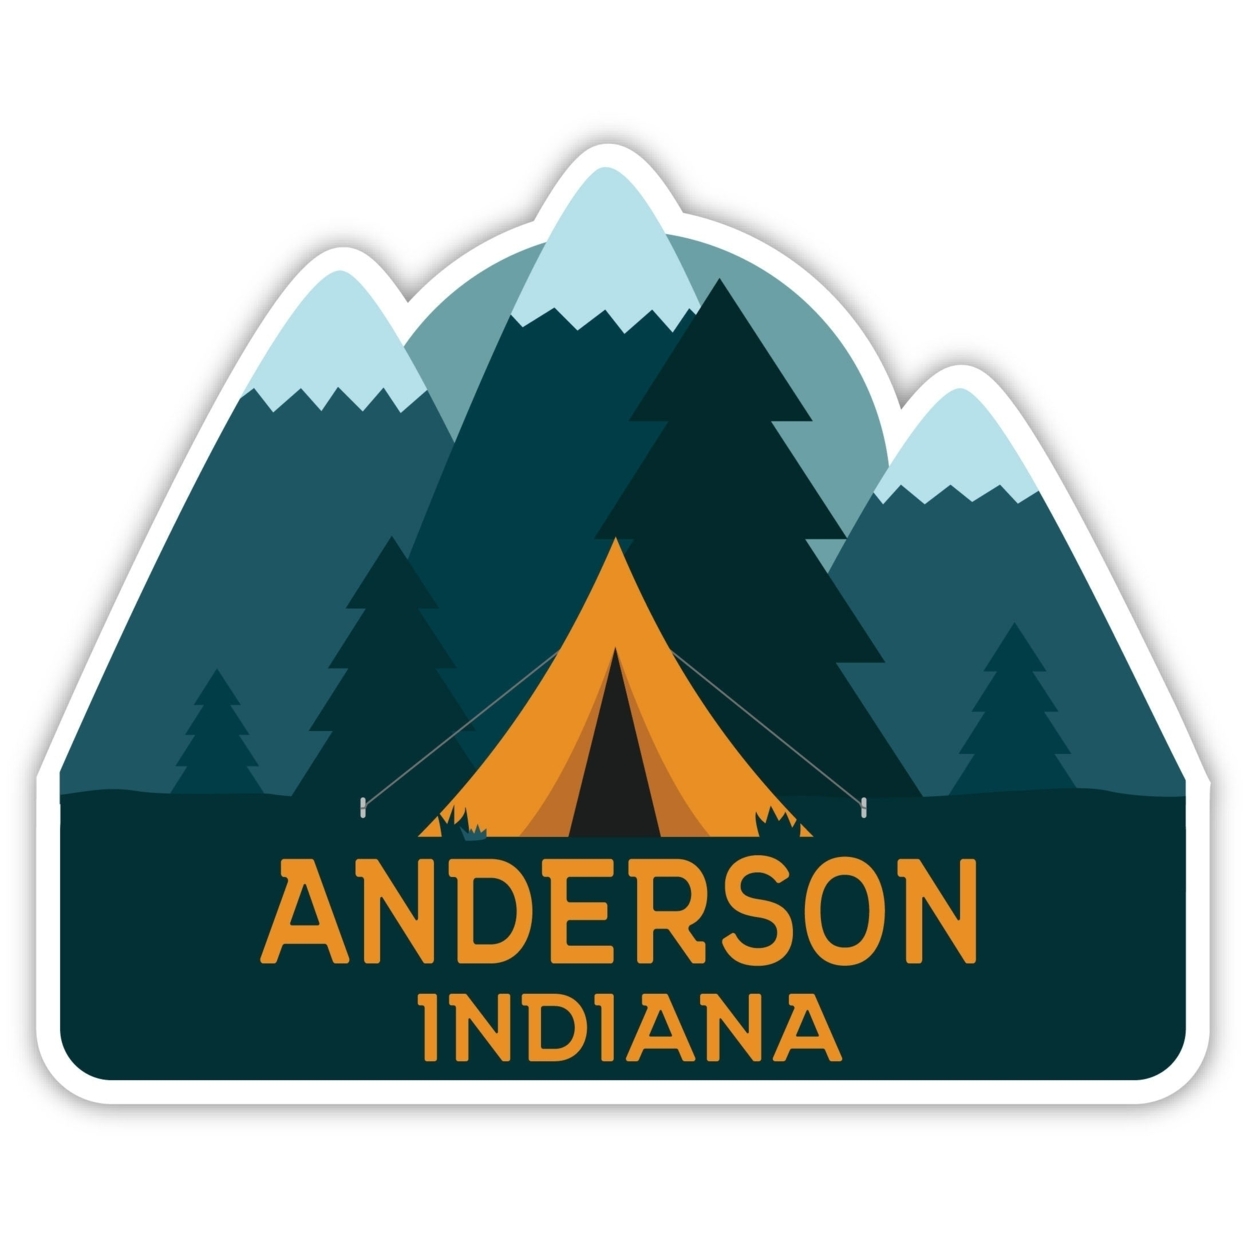 Anderson Indiana Souvenir Decorative Stickers (Choose Theme And Size) - 4-Pack, 10-Inch, Tent